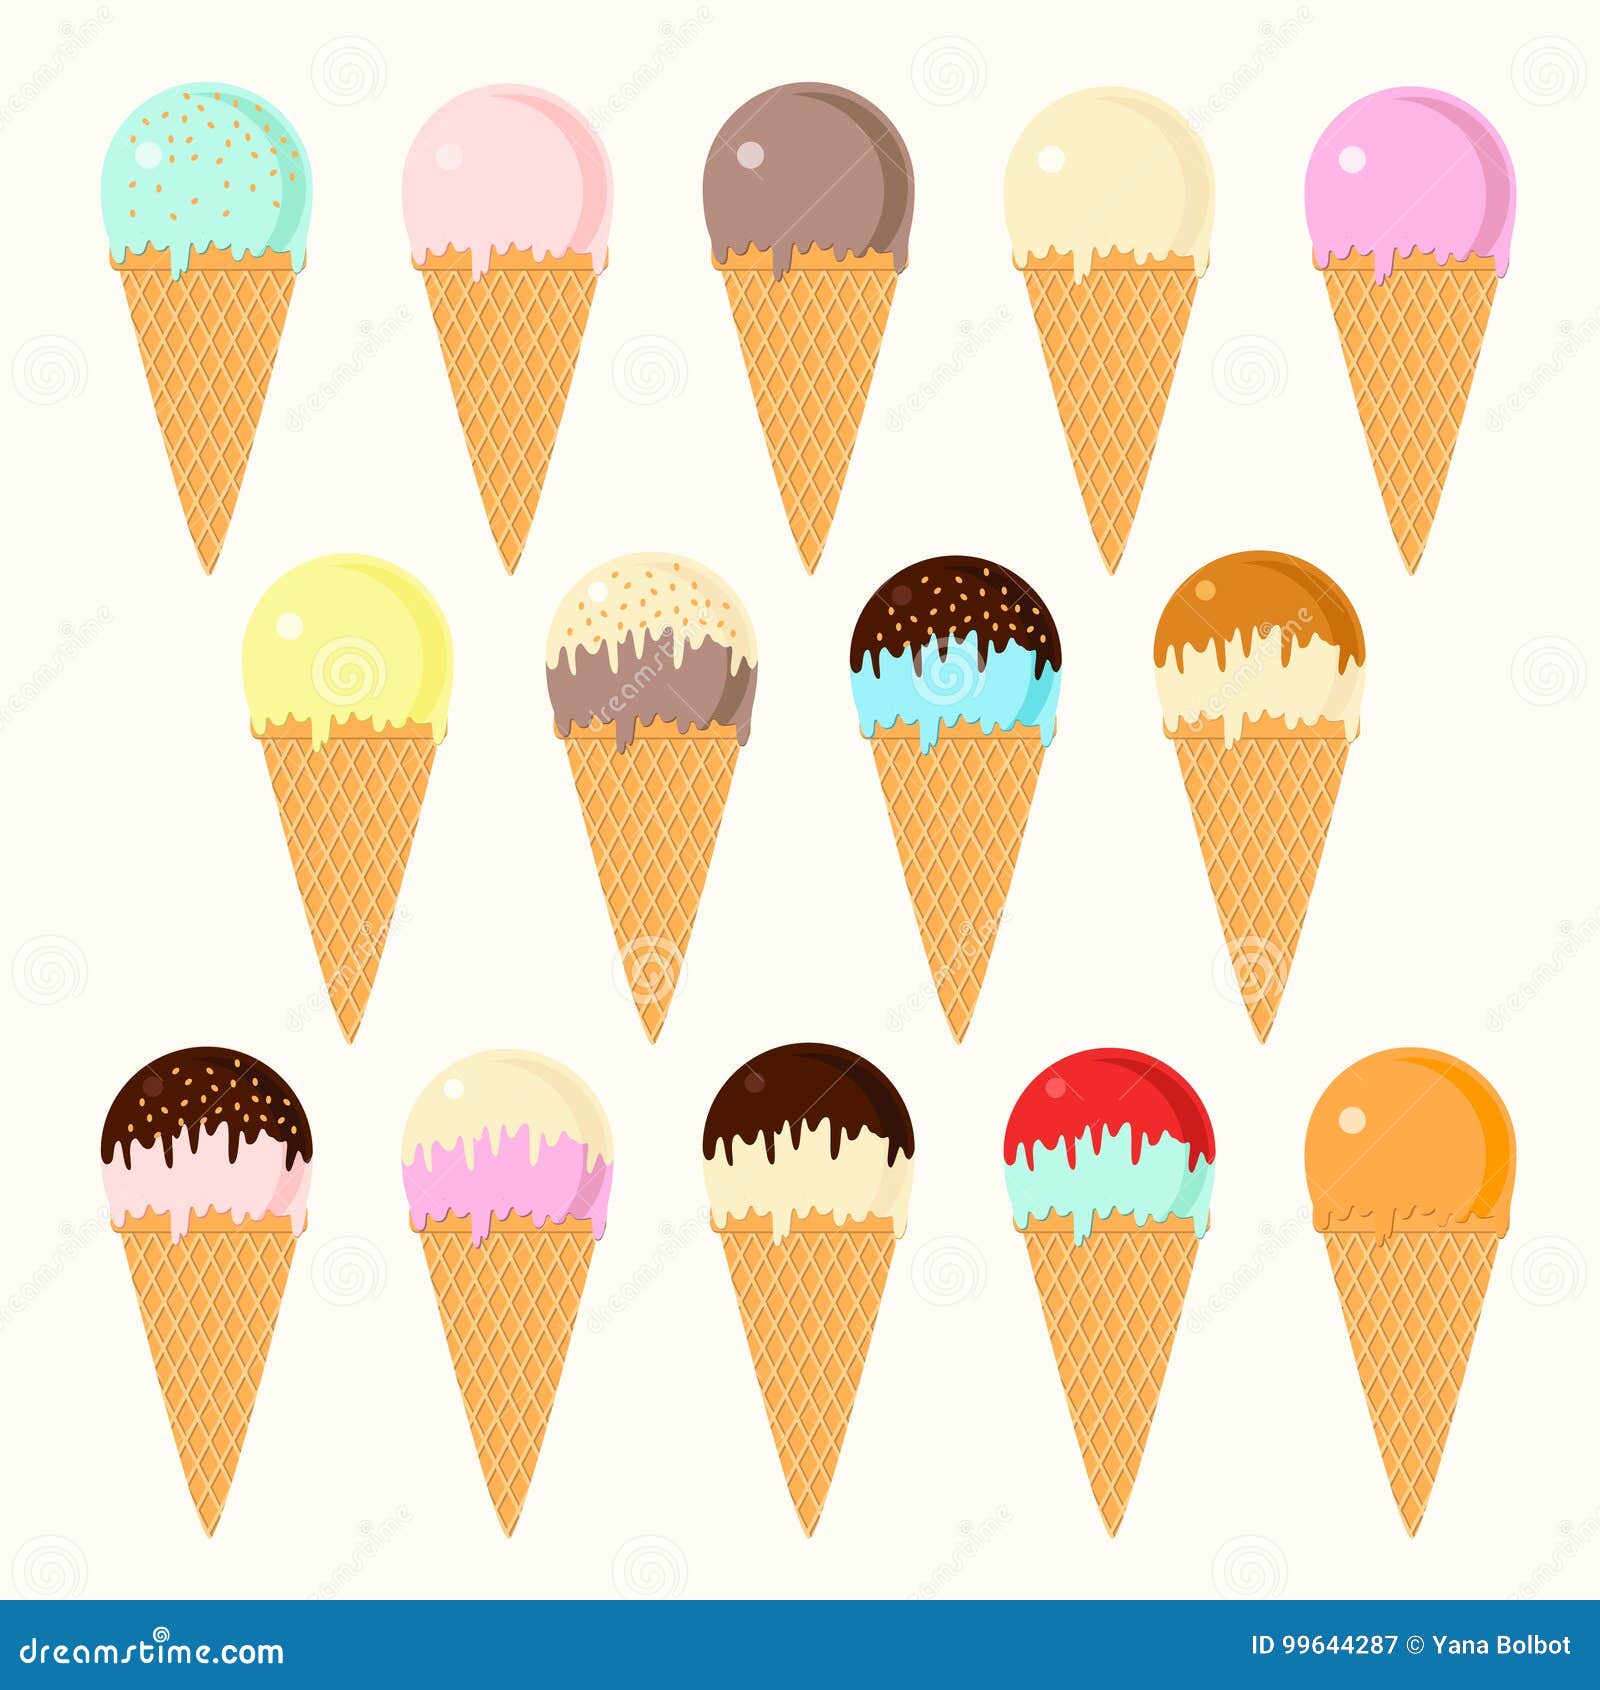 Set of Cartoon Icons. Ice Cream Scoops in Different Colors and Waffle Cone  Stock Vector - Illustration of collection, fruit: 99644287